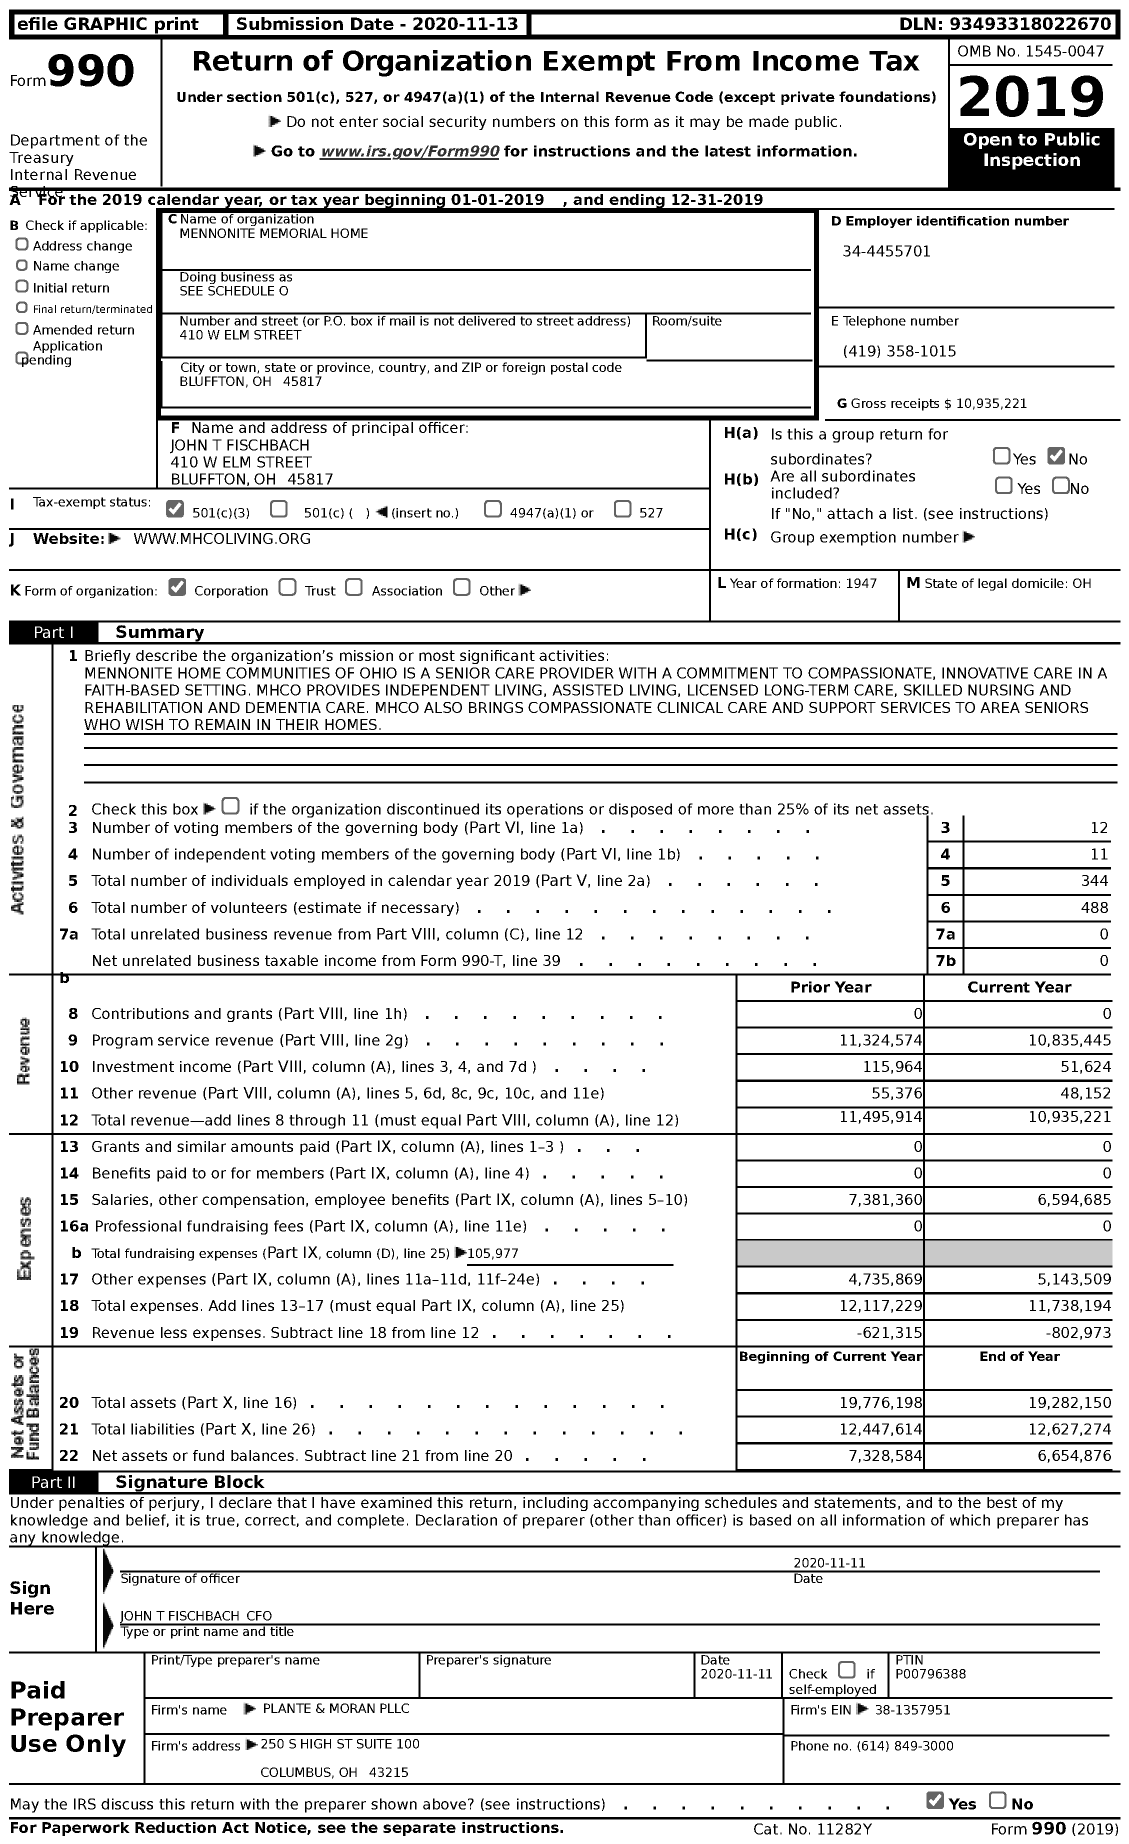 Image of first page of 2019 Form 990 for Mennonite Home Communities of Ohio (MHCO)